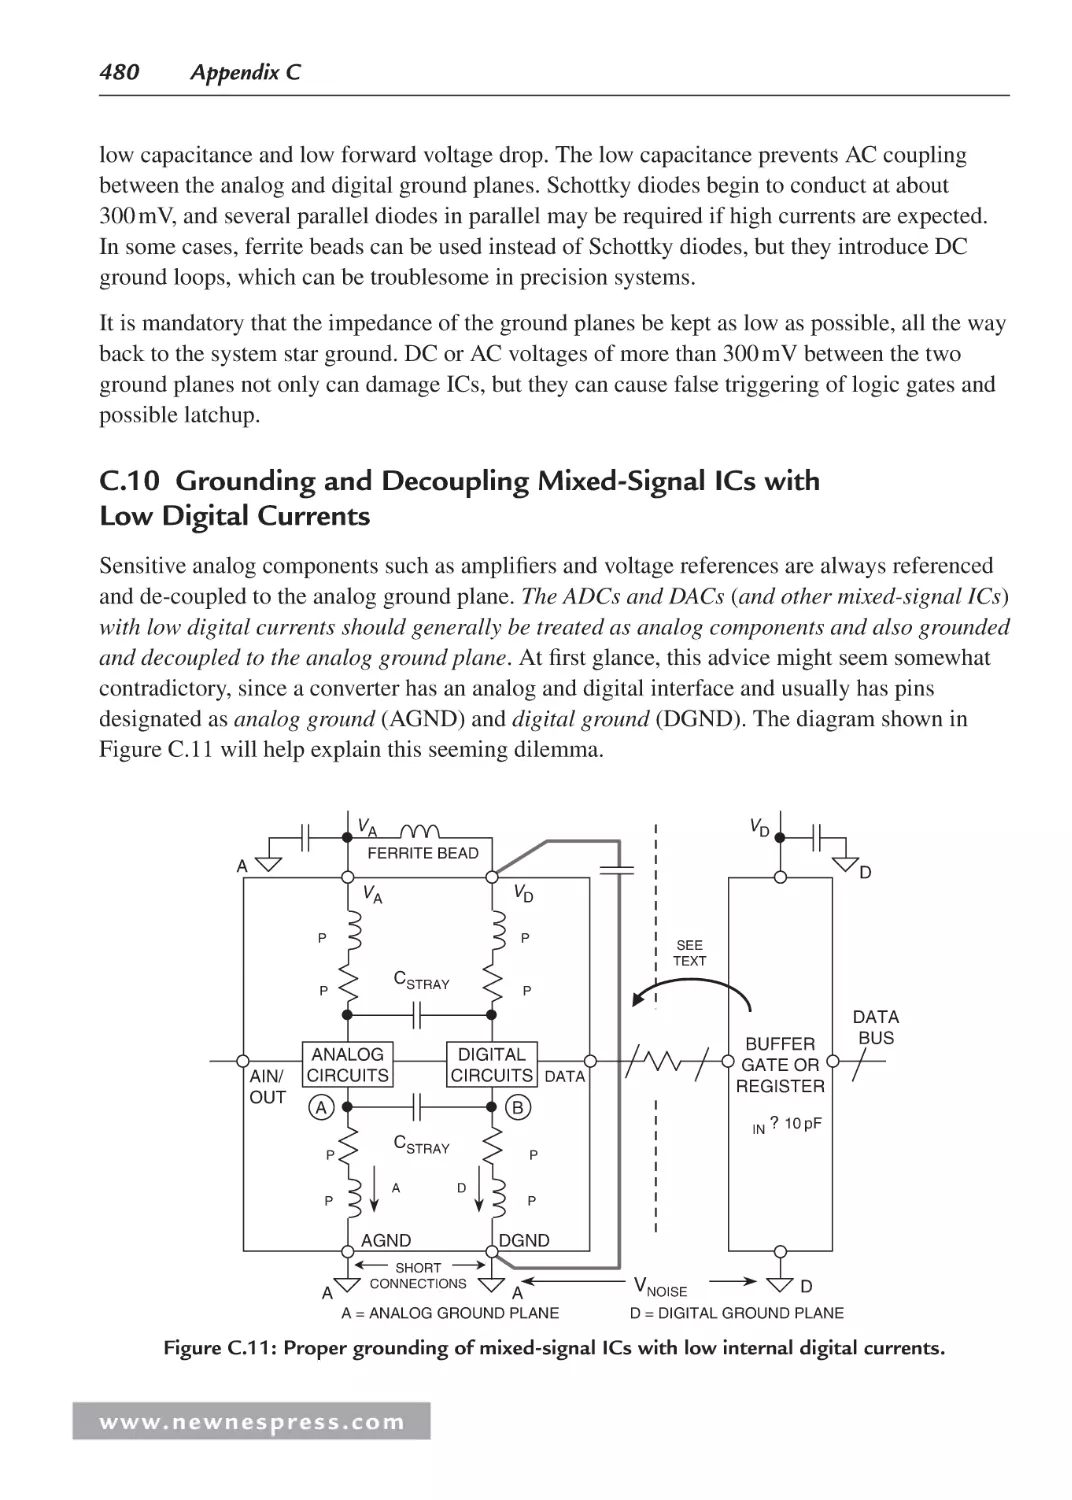 C.10 Grounding and Decoupling Mixed-Signal ICs with Low Digital Currents